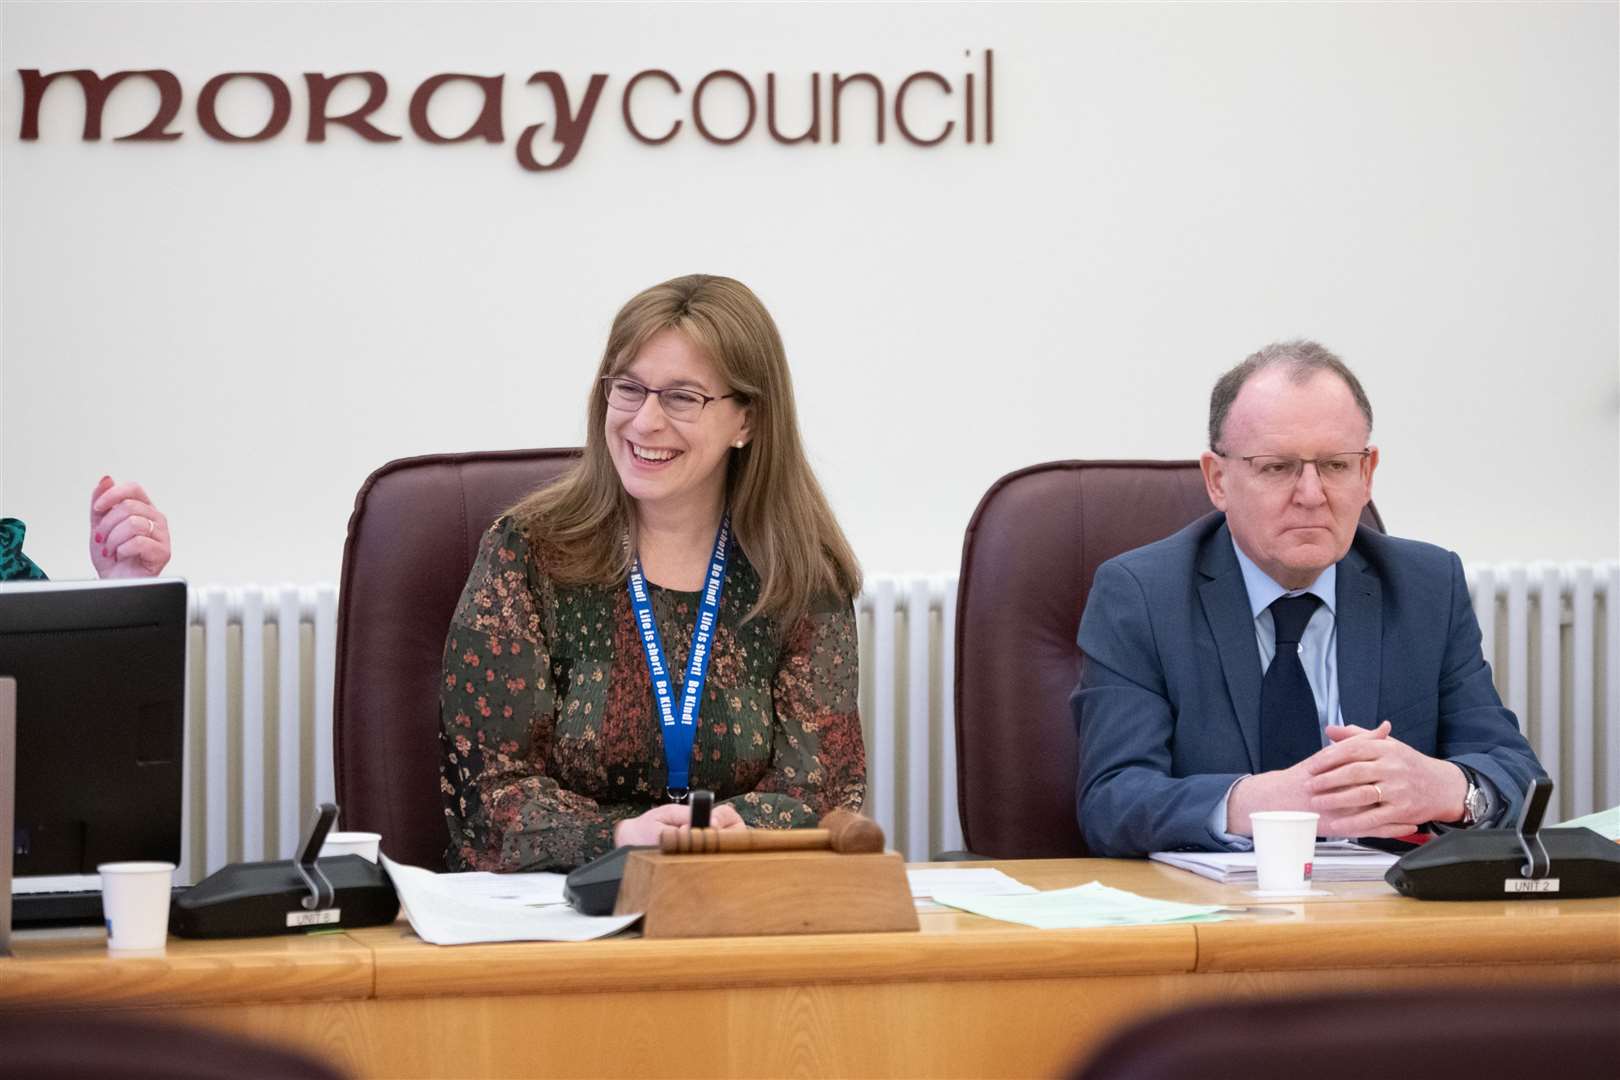 Council leader Kathleen Robertson alongside its chief executive Roddy Burns. Picture: Daniel Forsyth.